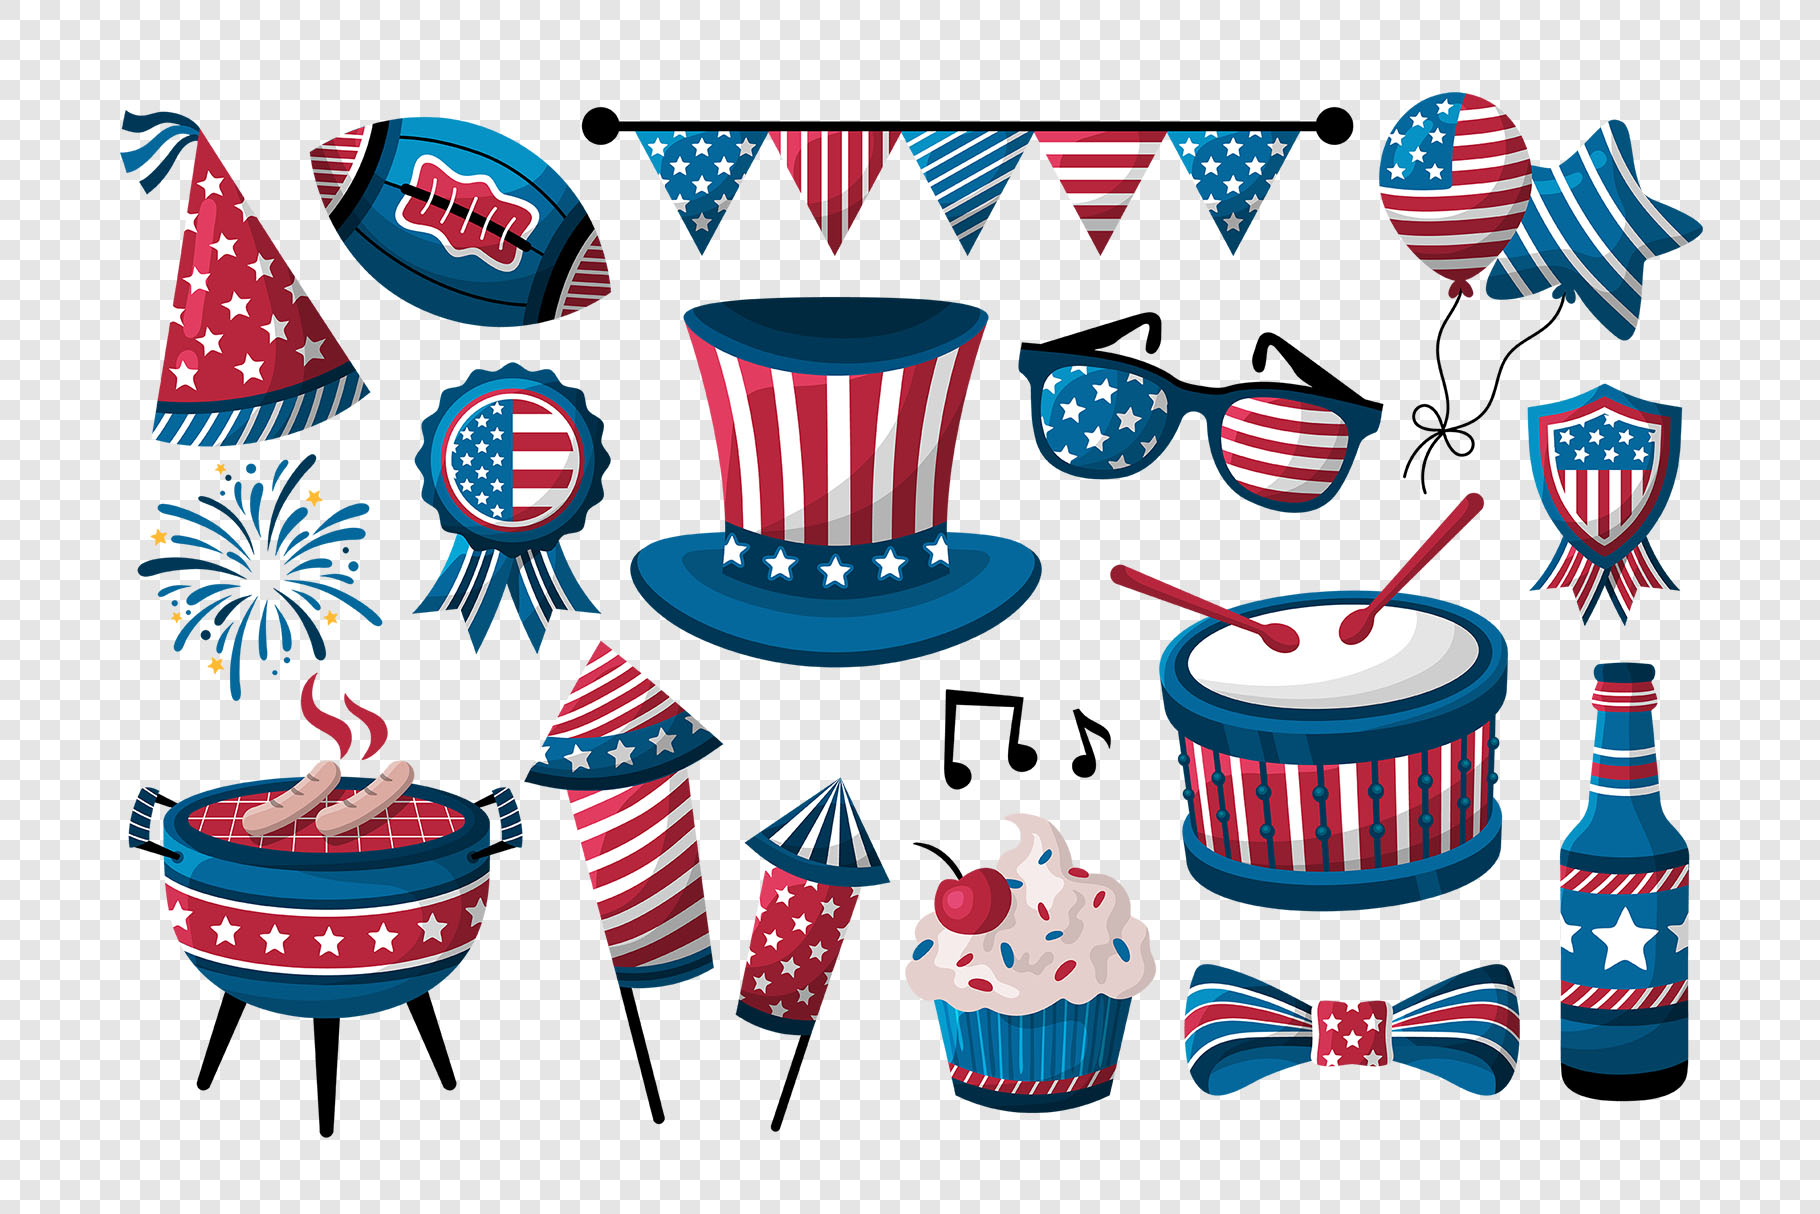 4th of July Illustrations Set (AI, EPS, PNG Format)